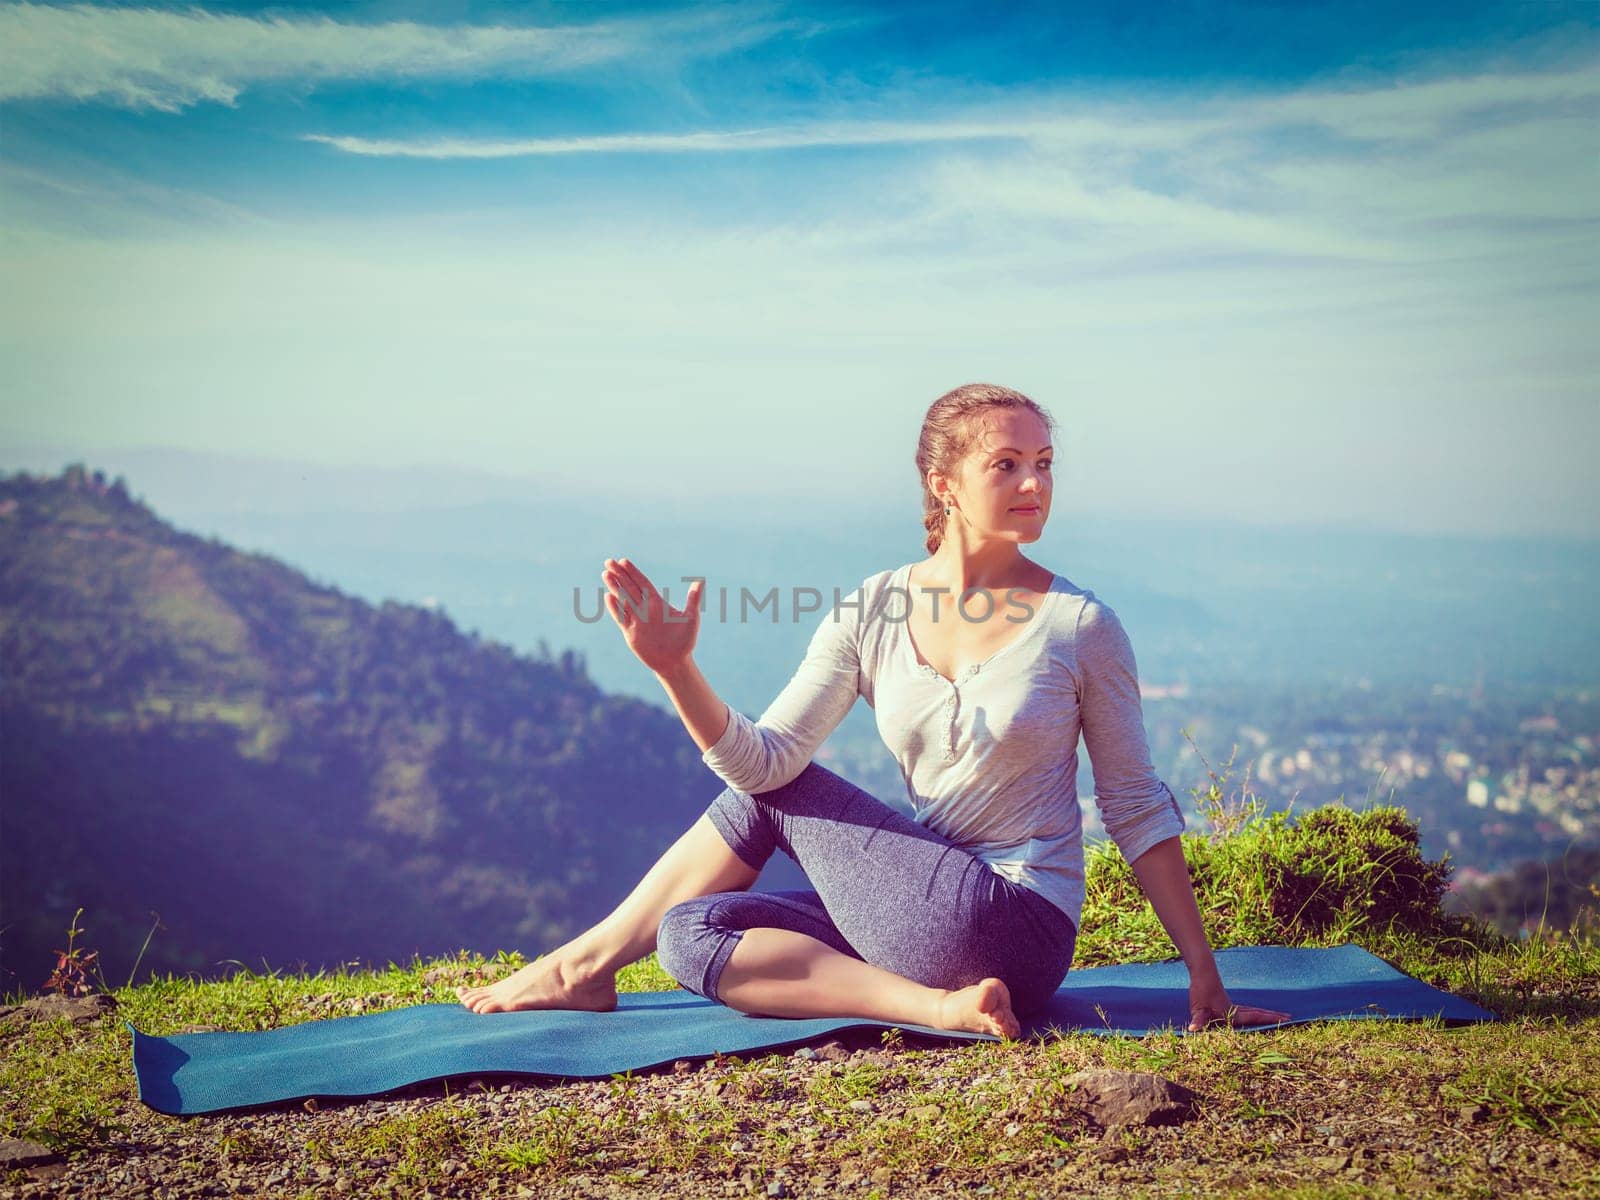 Yoga exercise outdoors - woman doing Ardha matsyendrasana asana - half spinal twist pose mountains in Himalayas in India in the morning. Vintage retro effect filtered hipster style image.